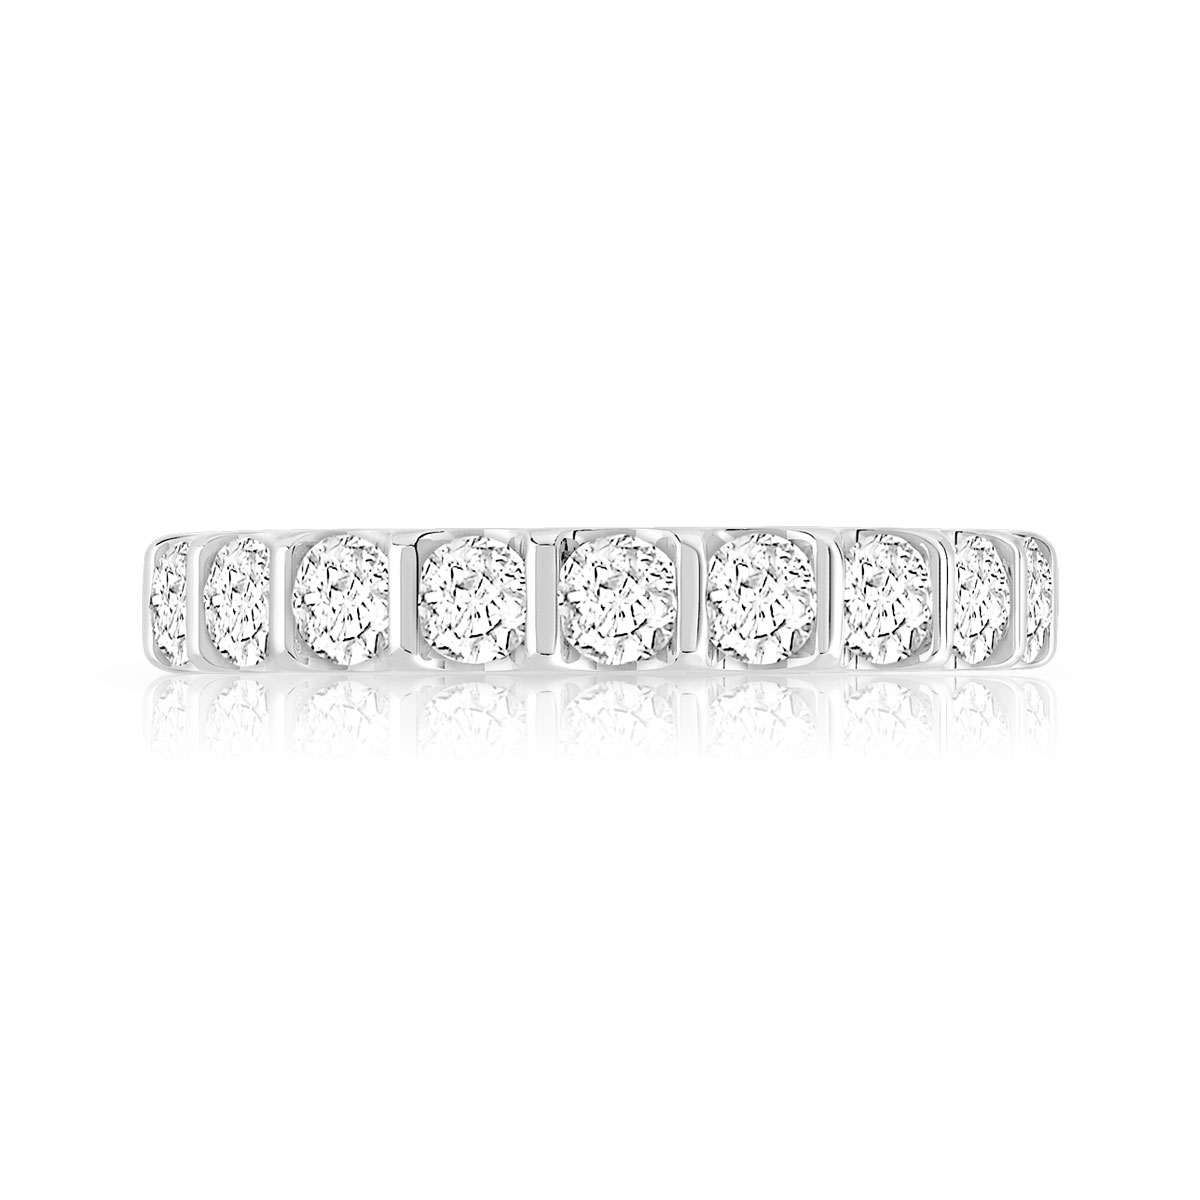 Alliance or 750 blanc diamants synthétiques total 2 carats - vue 3